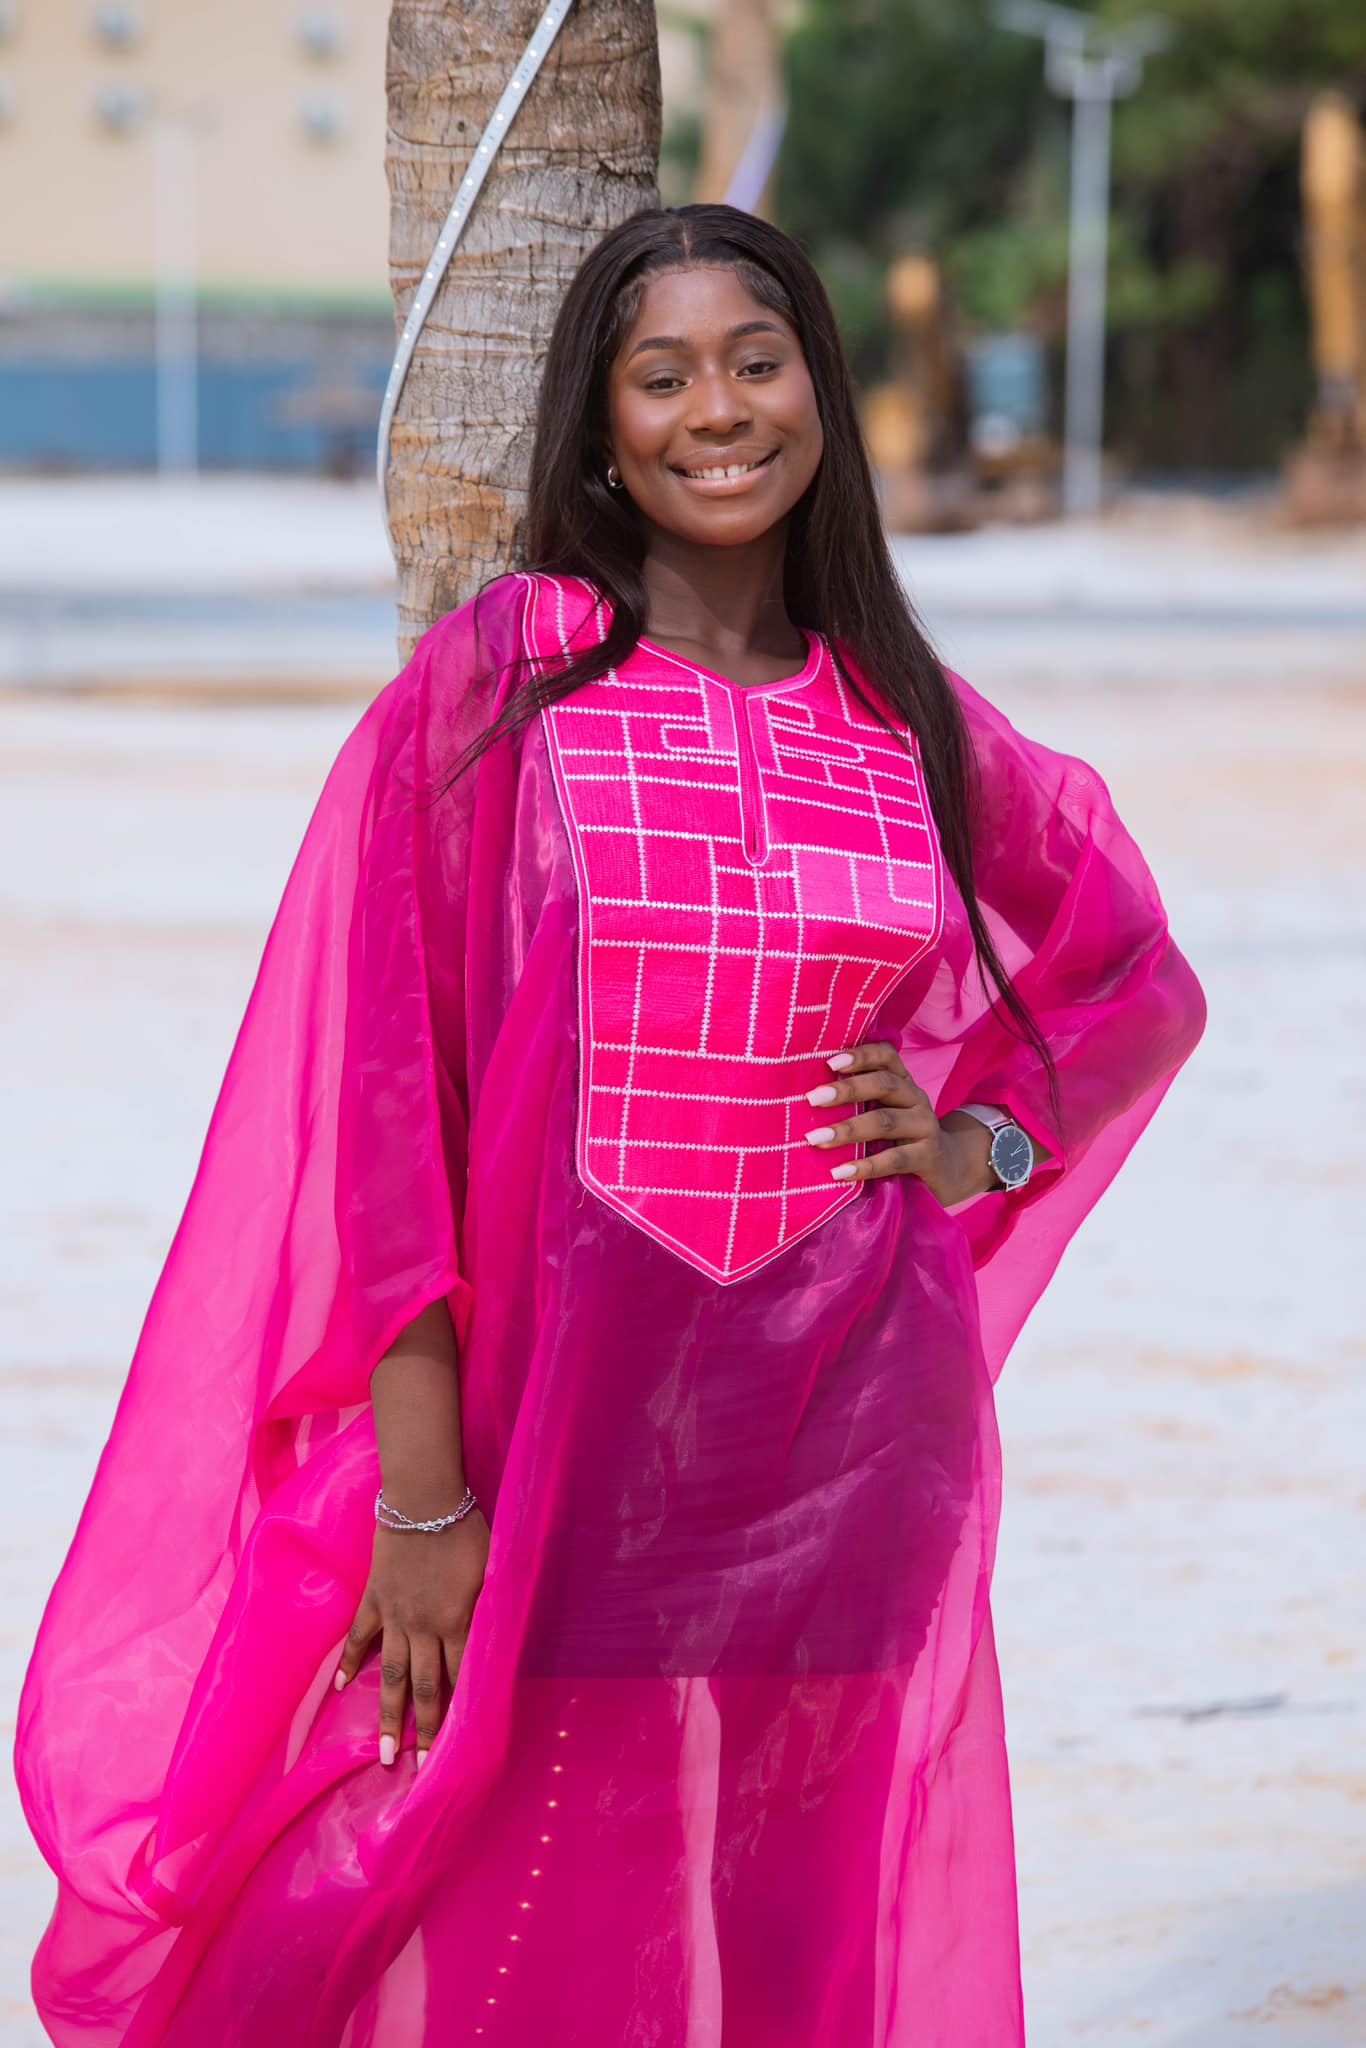 Kaadè Collection Design by Binta DIALLO - The Miss GUINEE 2023 Contestants Photoshoot - Sponsored by the National Office of Guinean Leisure - Camayenne Beach - DN-AFRICA MEDIA PARTNER